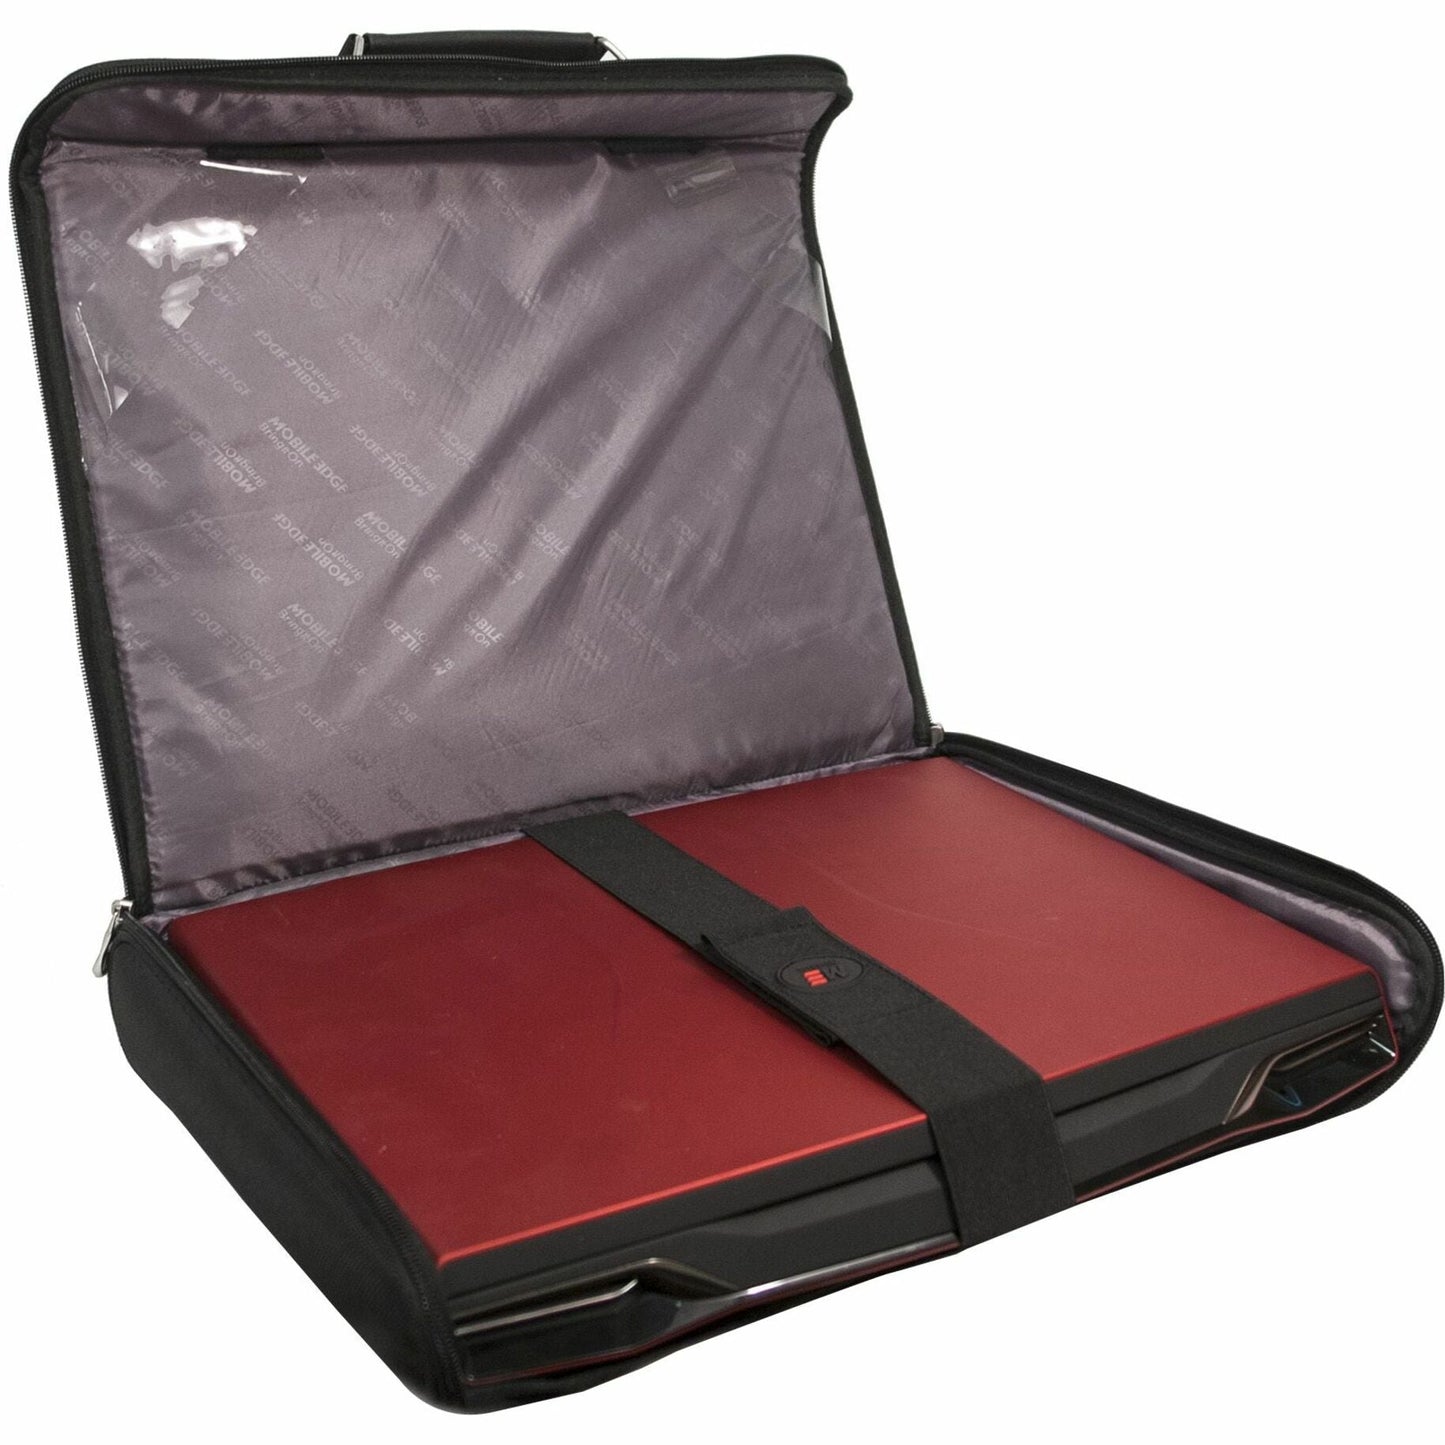 Mobile Edge Express Carrying Case (Briefcase) for 17" Chromebook - Black